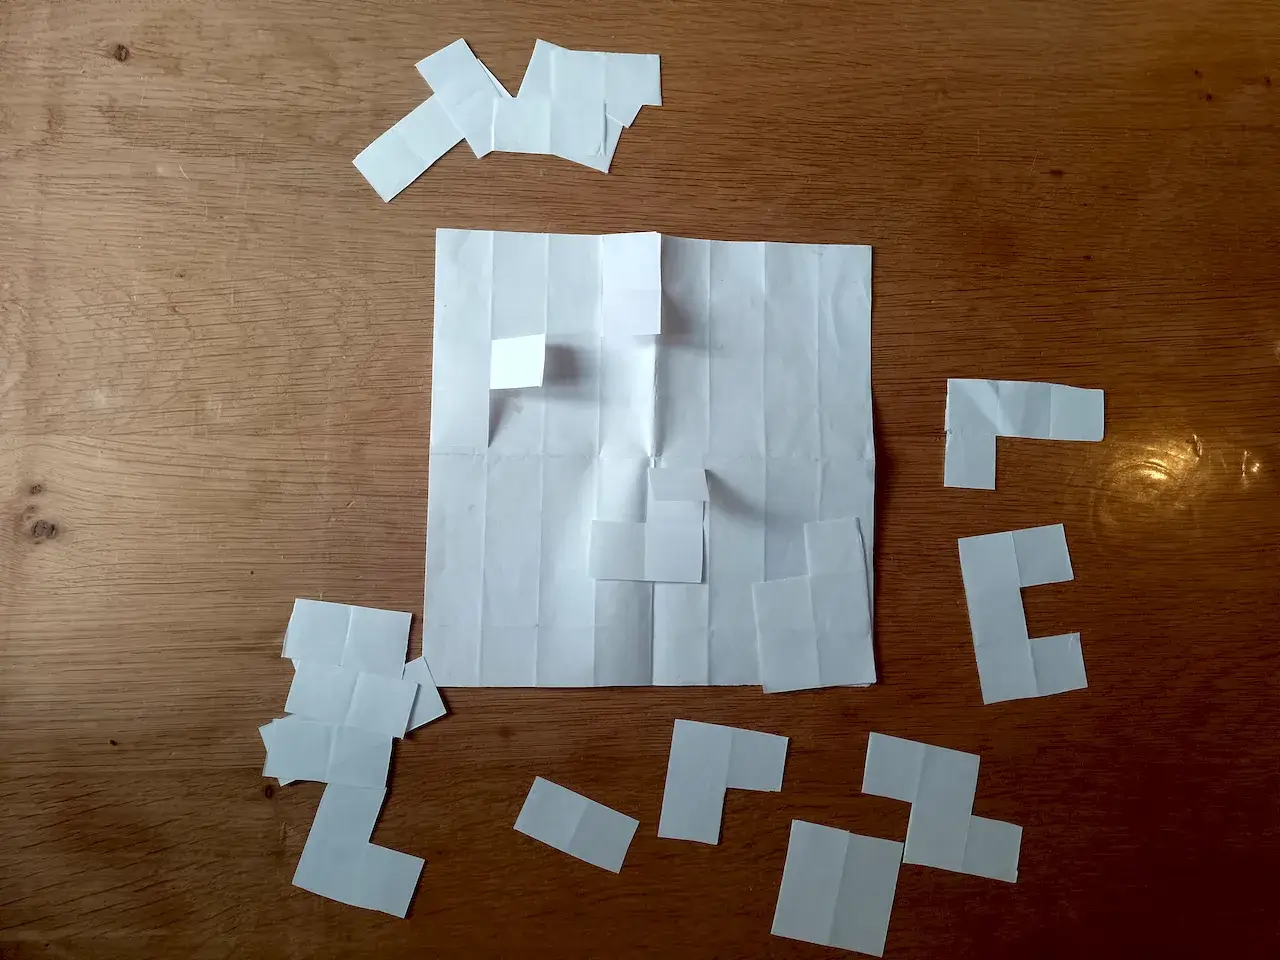 A paper prototype I made for the game. This showed me that the idea is solid, but “folding” is a bit flimsy a mechanic. As you see, I never even got so far as to draw ICONS on those pieces.